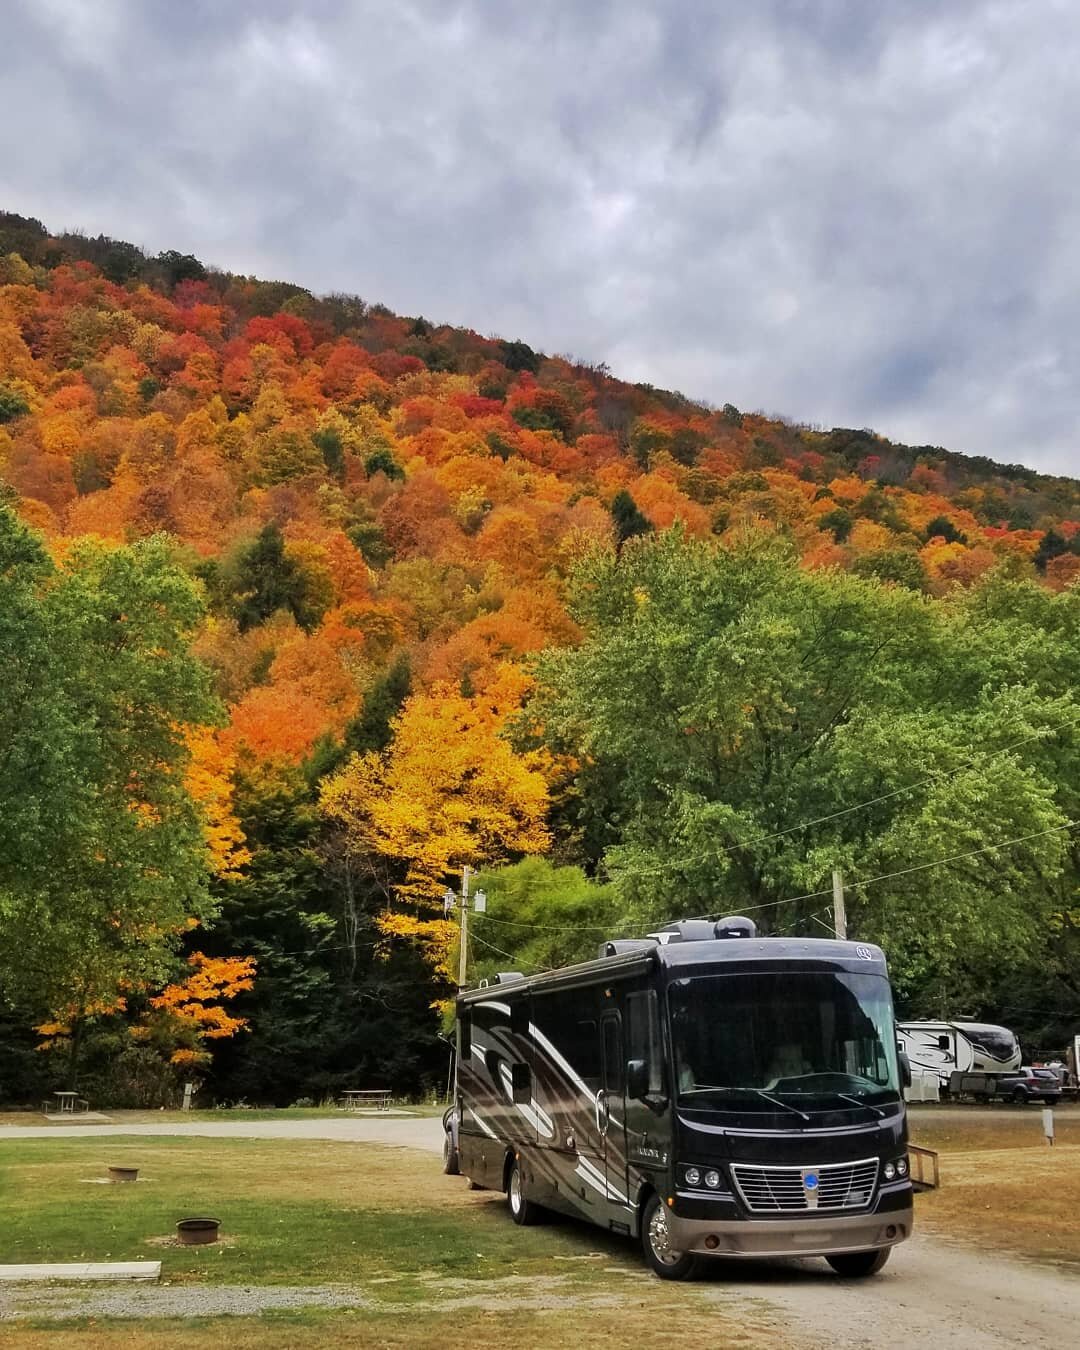 Moving Day!! We got Road Rambler (our nickname for our @holiday_rambler RV) all packed up and ready to roll!  But we couldn't leave without grabbing a quick snap of the incredible backdrop we enjoyed for the last 5 days!
.
When we arrived, the mounta